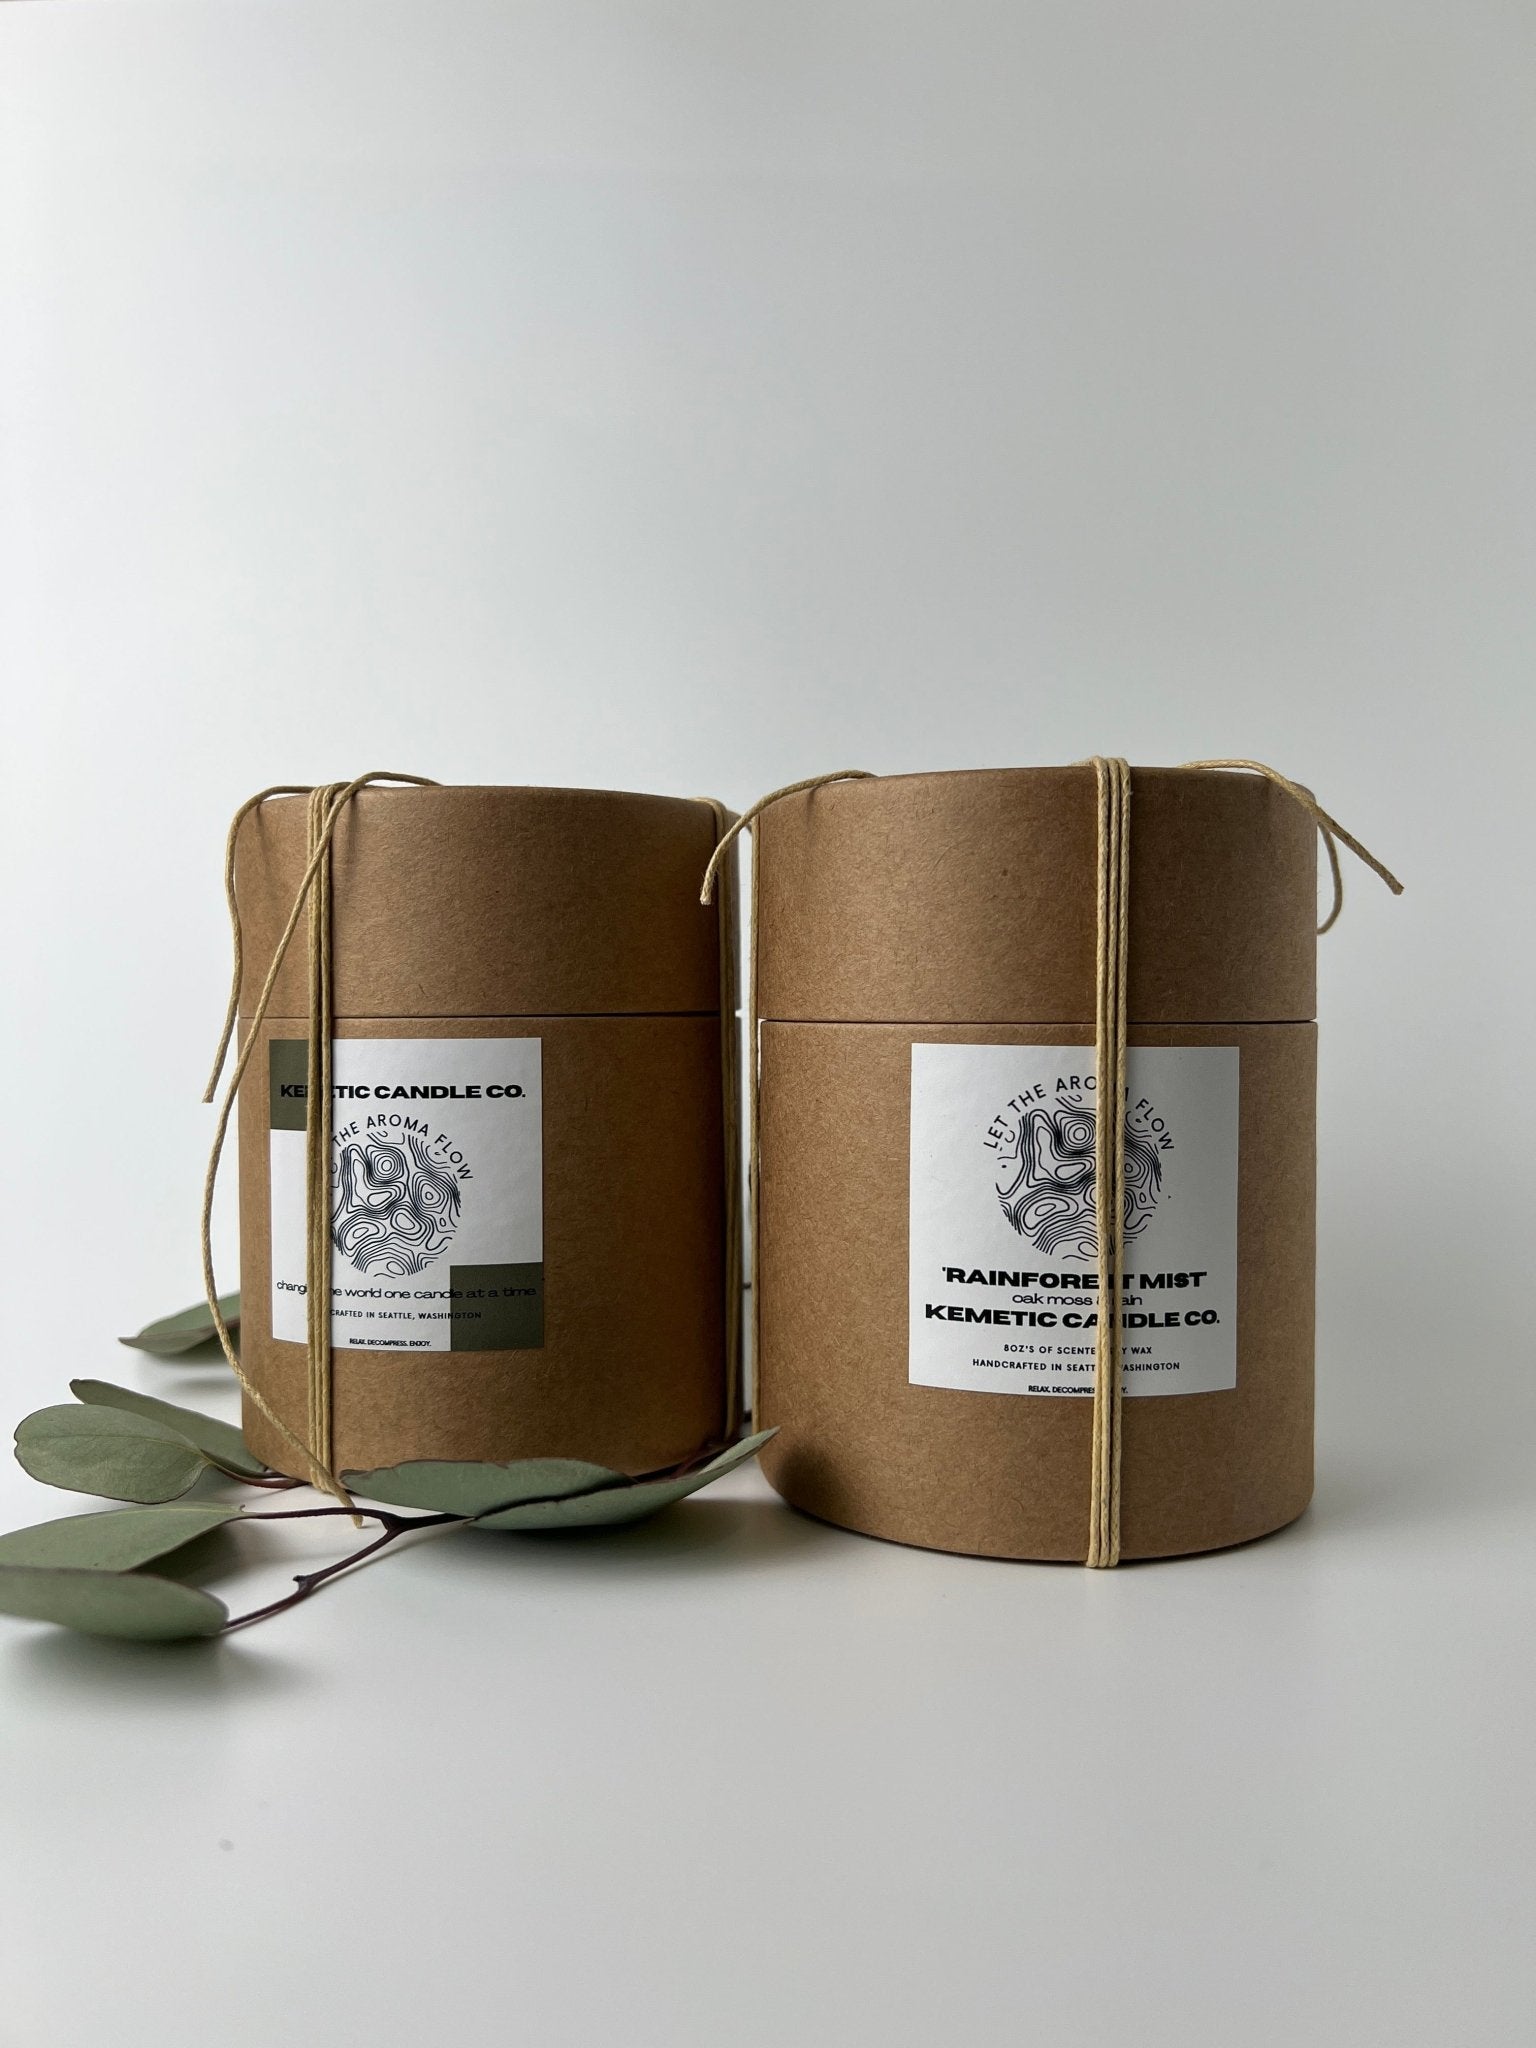 Bring the refreshing scent of the Pacific North West rainforest into your home with Kemetic Candle Co.'s Rainforest Mist 8 oz candles. Shop now and experience nature's tranquility.